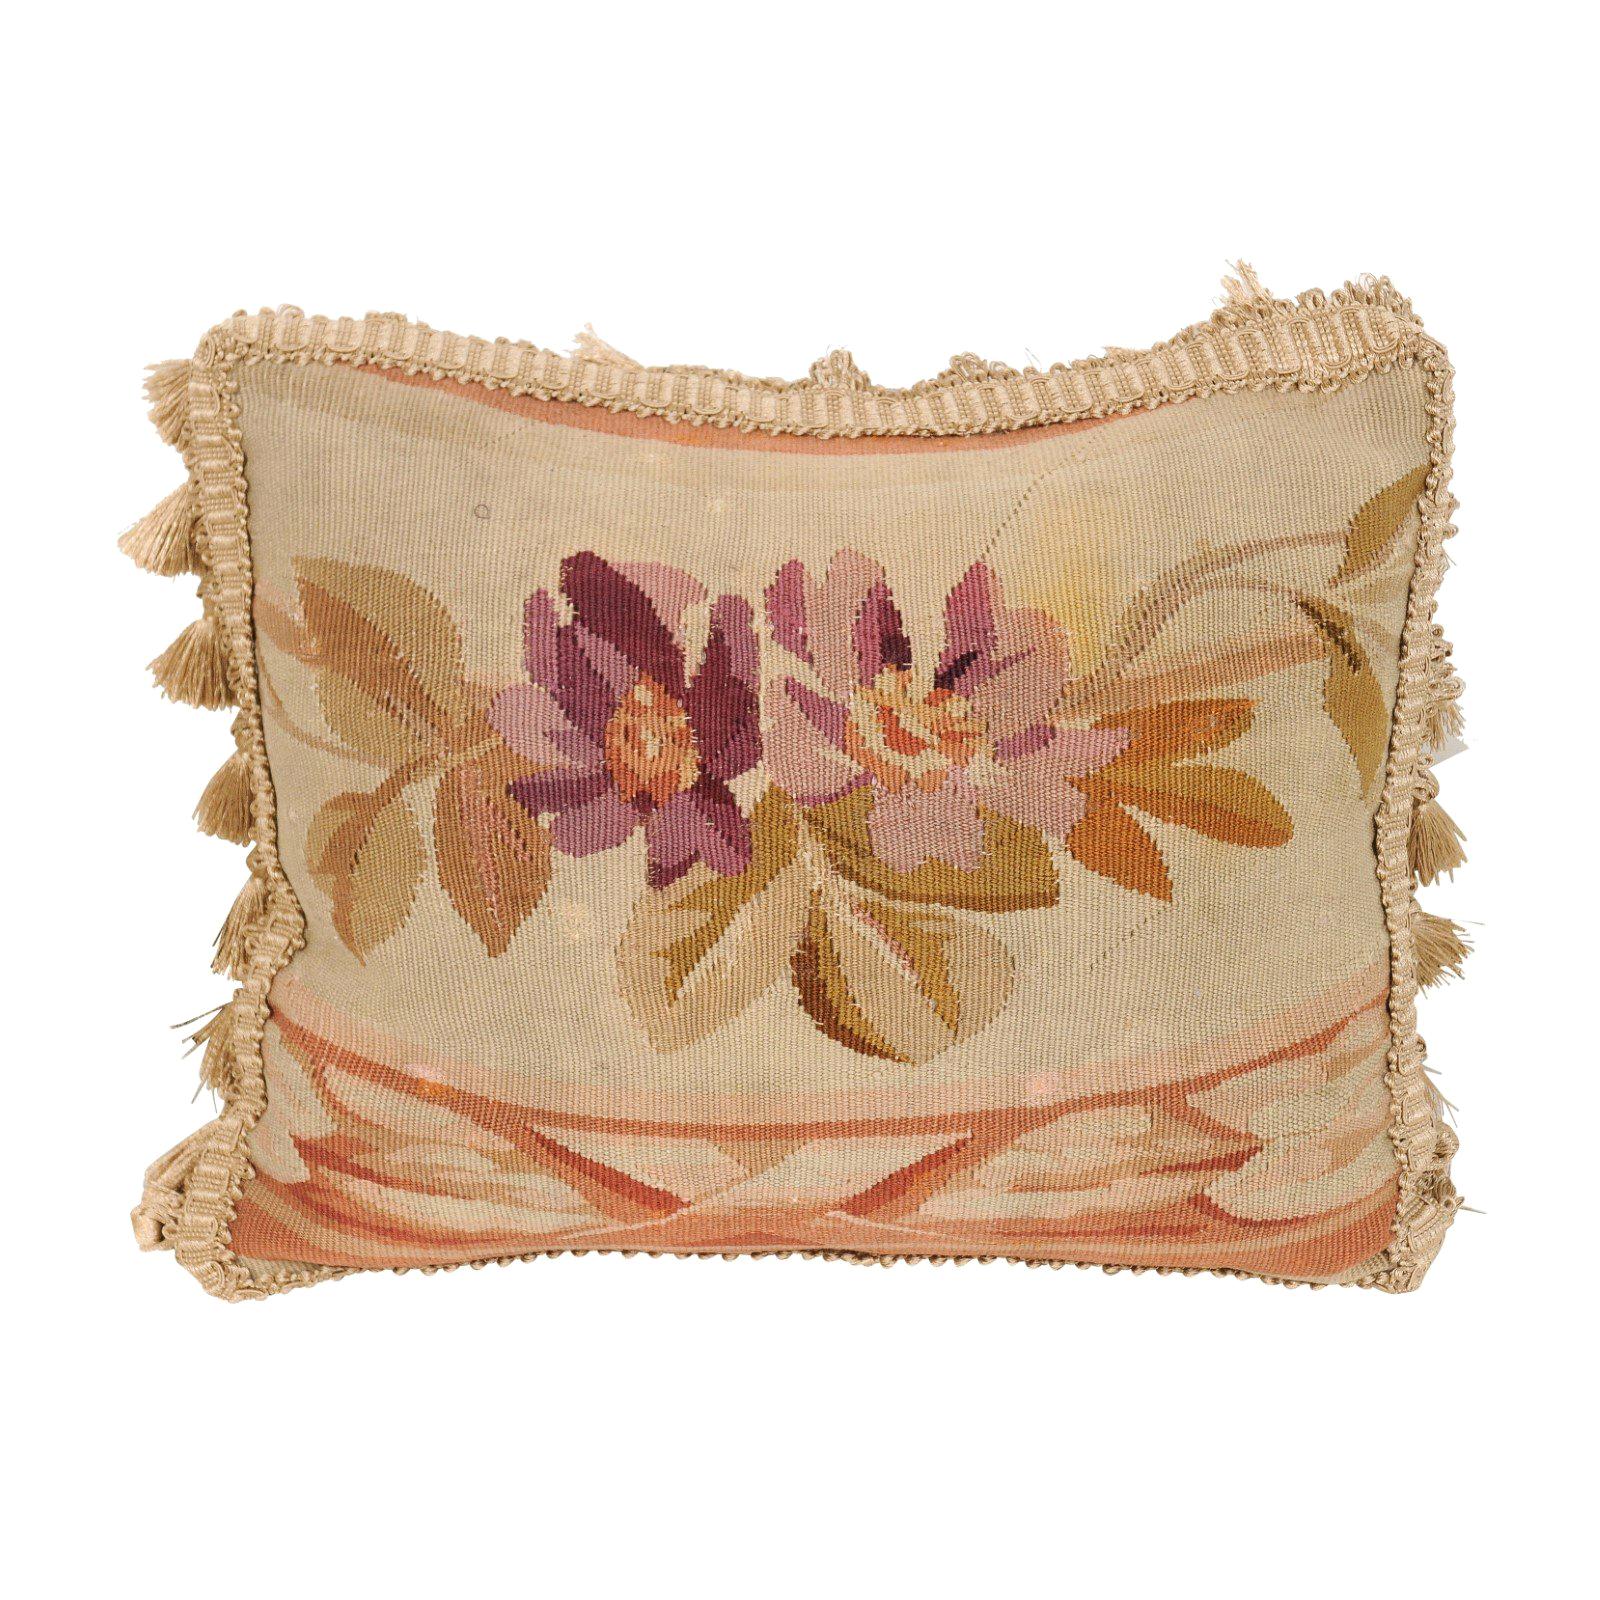 French Aubusson Tapestry 19th Century Pillow with Purple Floral Décor, Tassels For Sale